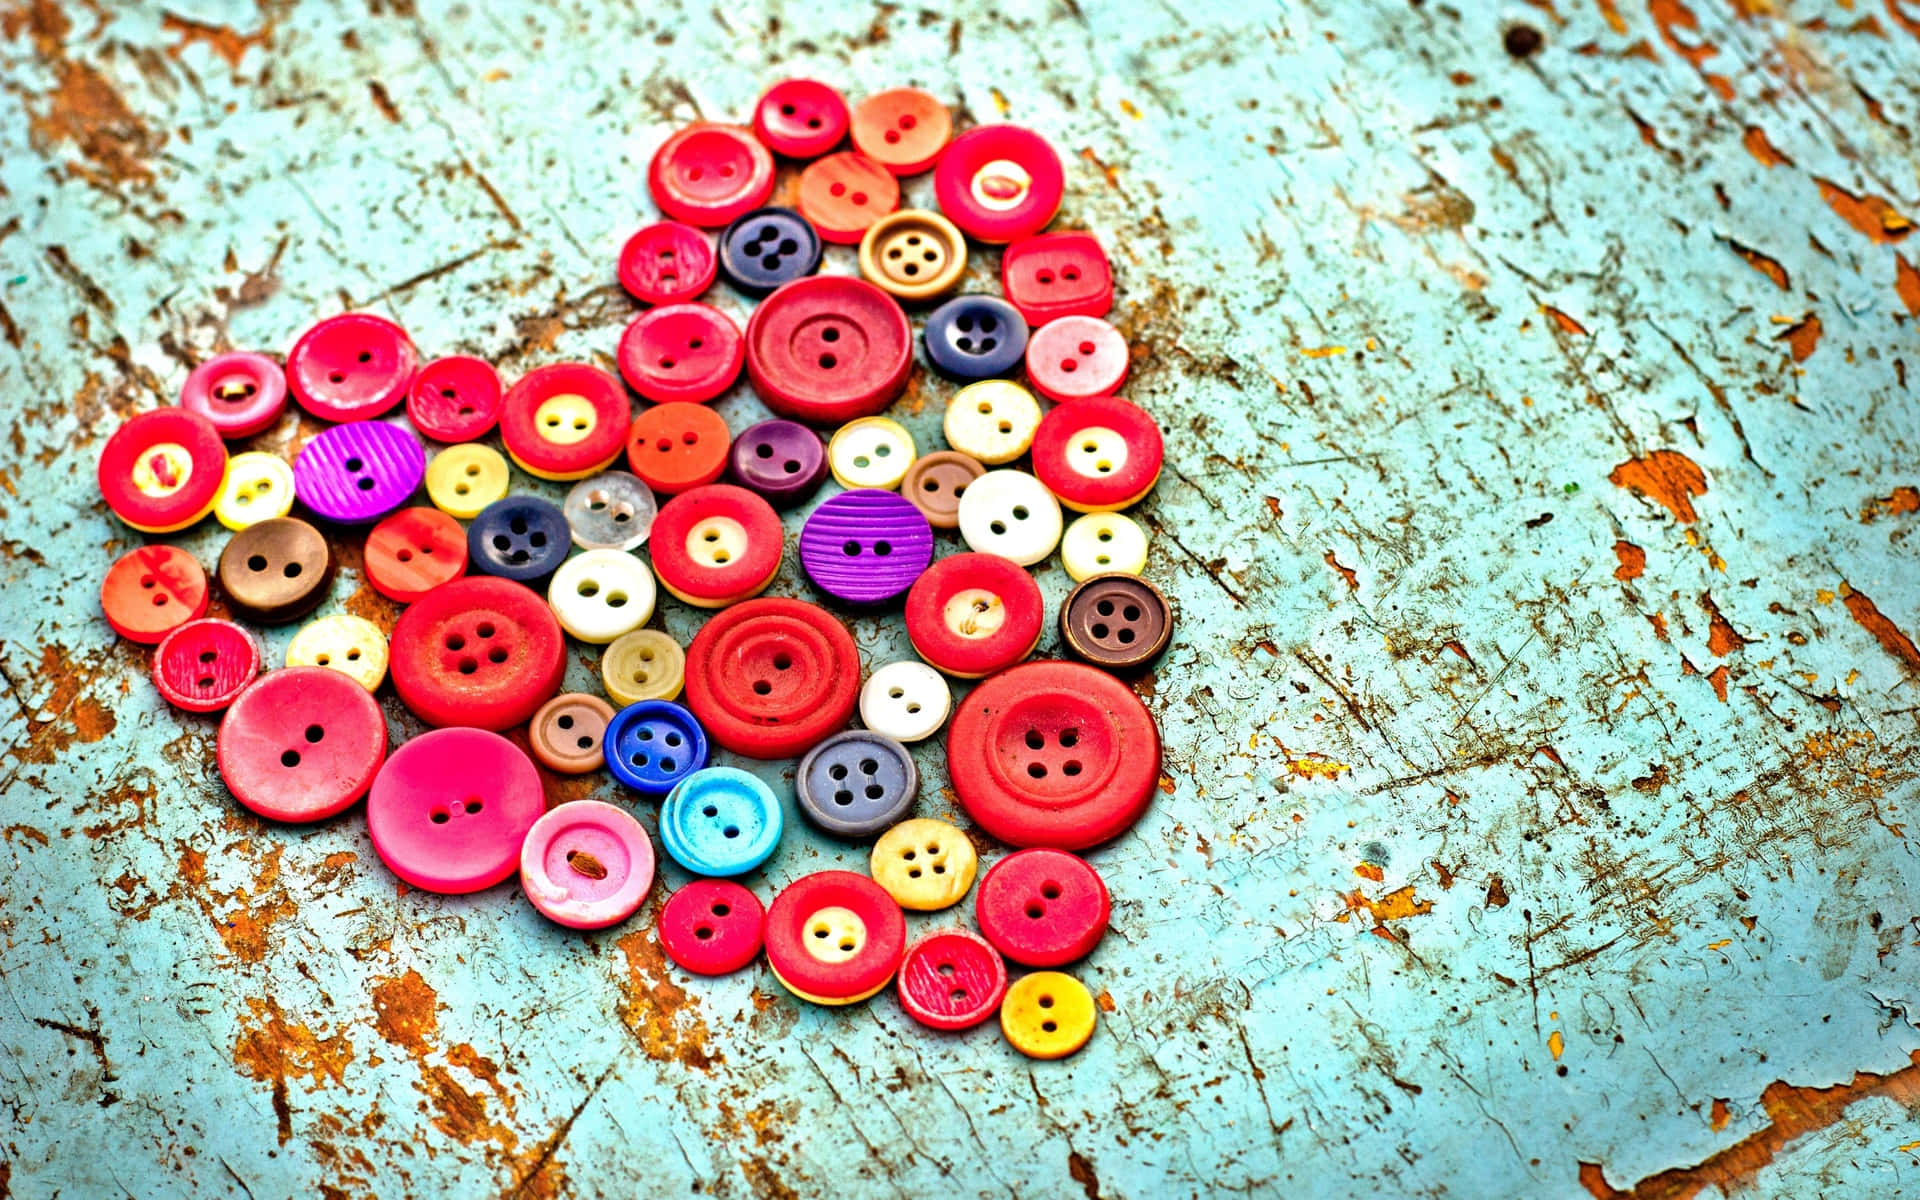 A Heart Made Of Buttons On A Wooden Surface